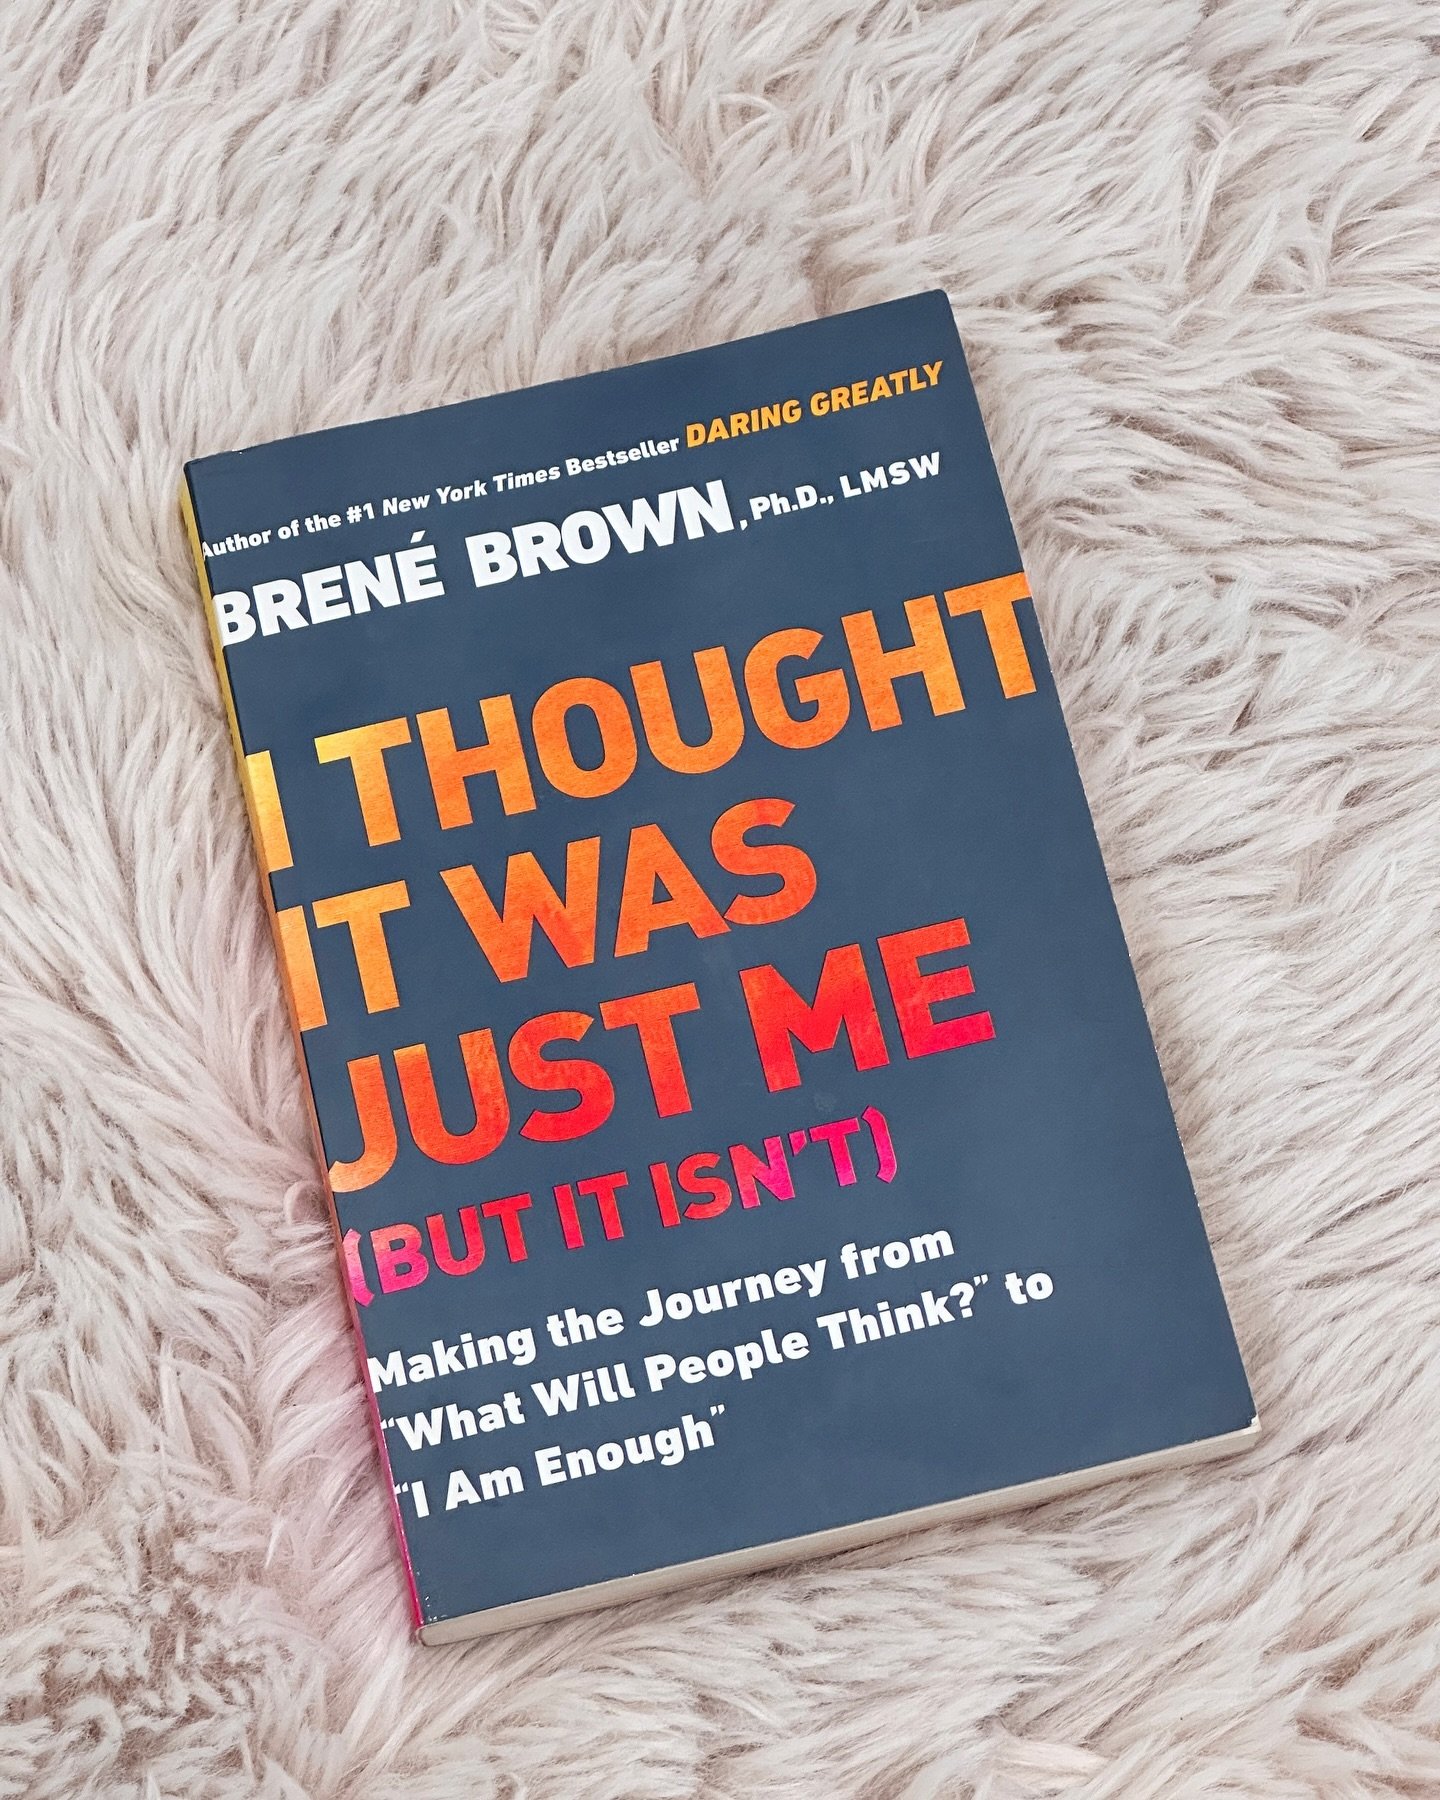 📖 Book of the Month 

Read with us!!! Every Month we will recommend a book that focuses on our monthly intentions.

Book: I thought it was just me (but it isn&rsquo;t)
Author: Bren&eacute; Brown
My Rating: ⭐️⭐️⭐️⭐️

Review: Making the journey from &